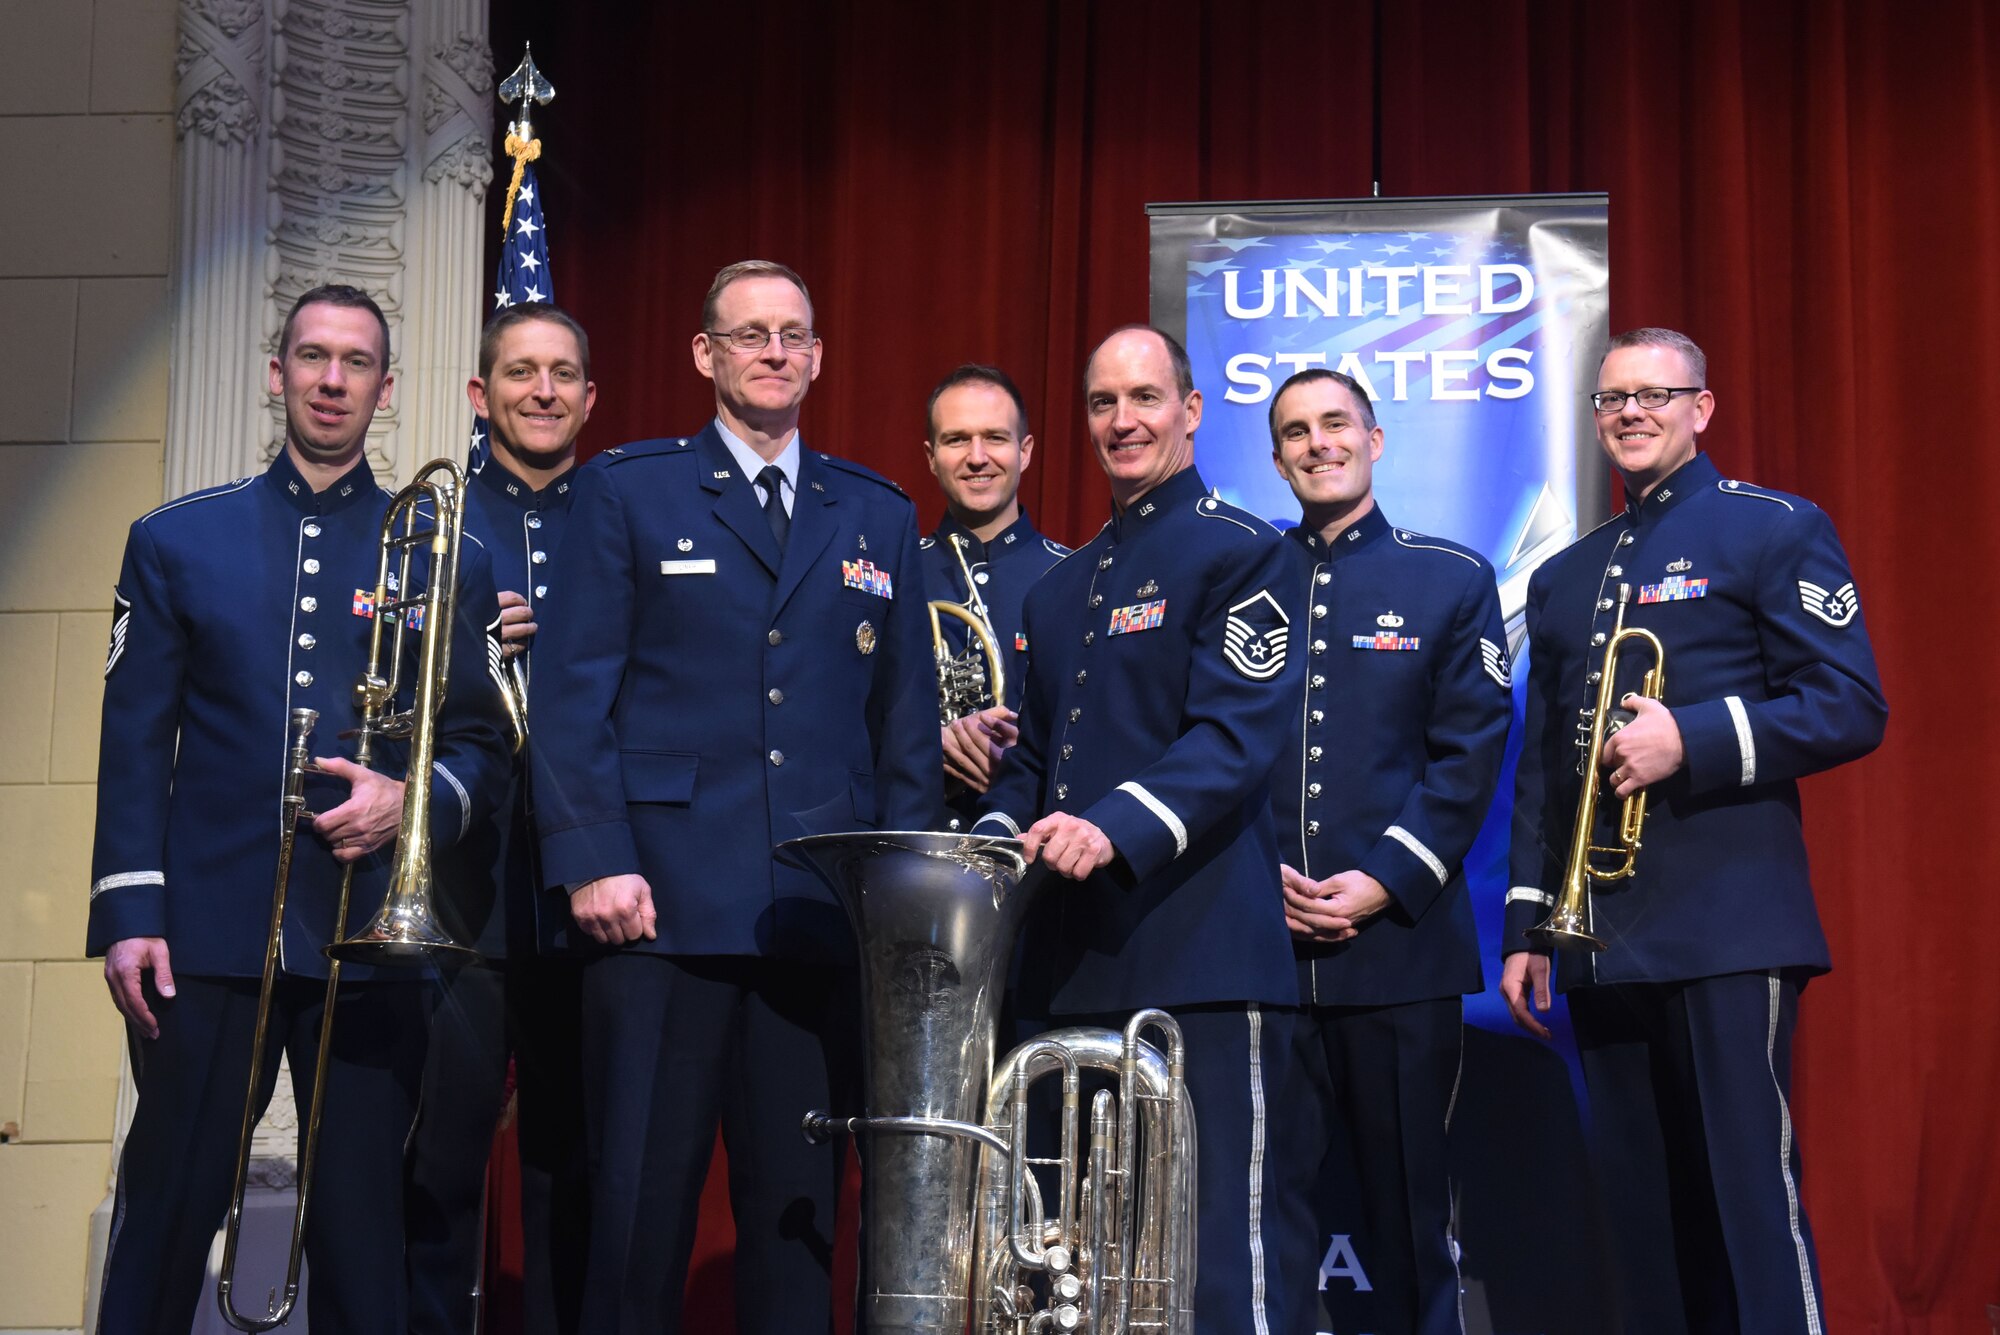 Col. David J. Linkh, the 28th Medical Group commander, stands with Offutt Brass members after their show at the Performing Arts Center’s Historic Theater in Rapid City, S.D., Oct. 14, 2018. The band supports the Air Force mission by raising morale and communicating the Air Force story through their music. (U.S. Air Force photo by Airman Christina Bennett)